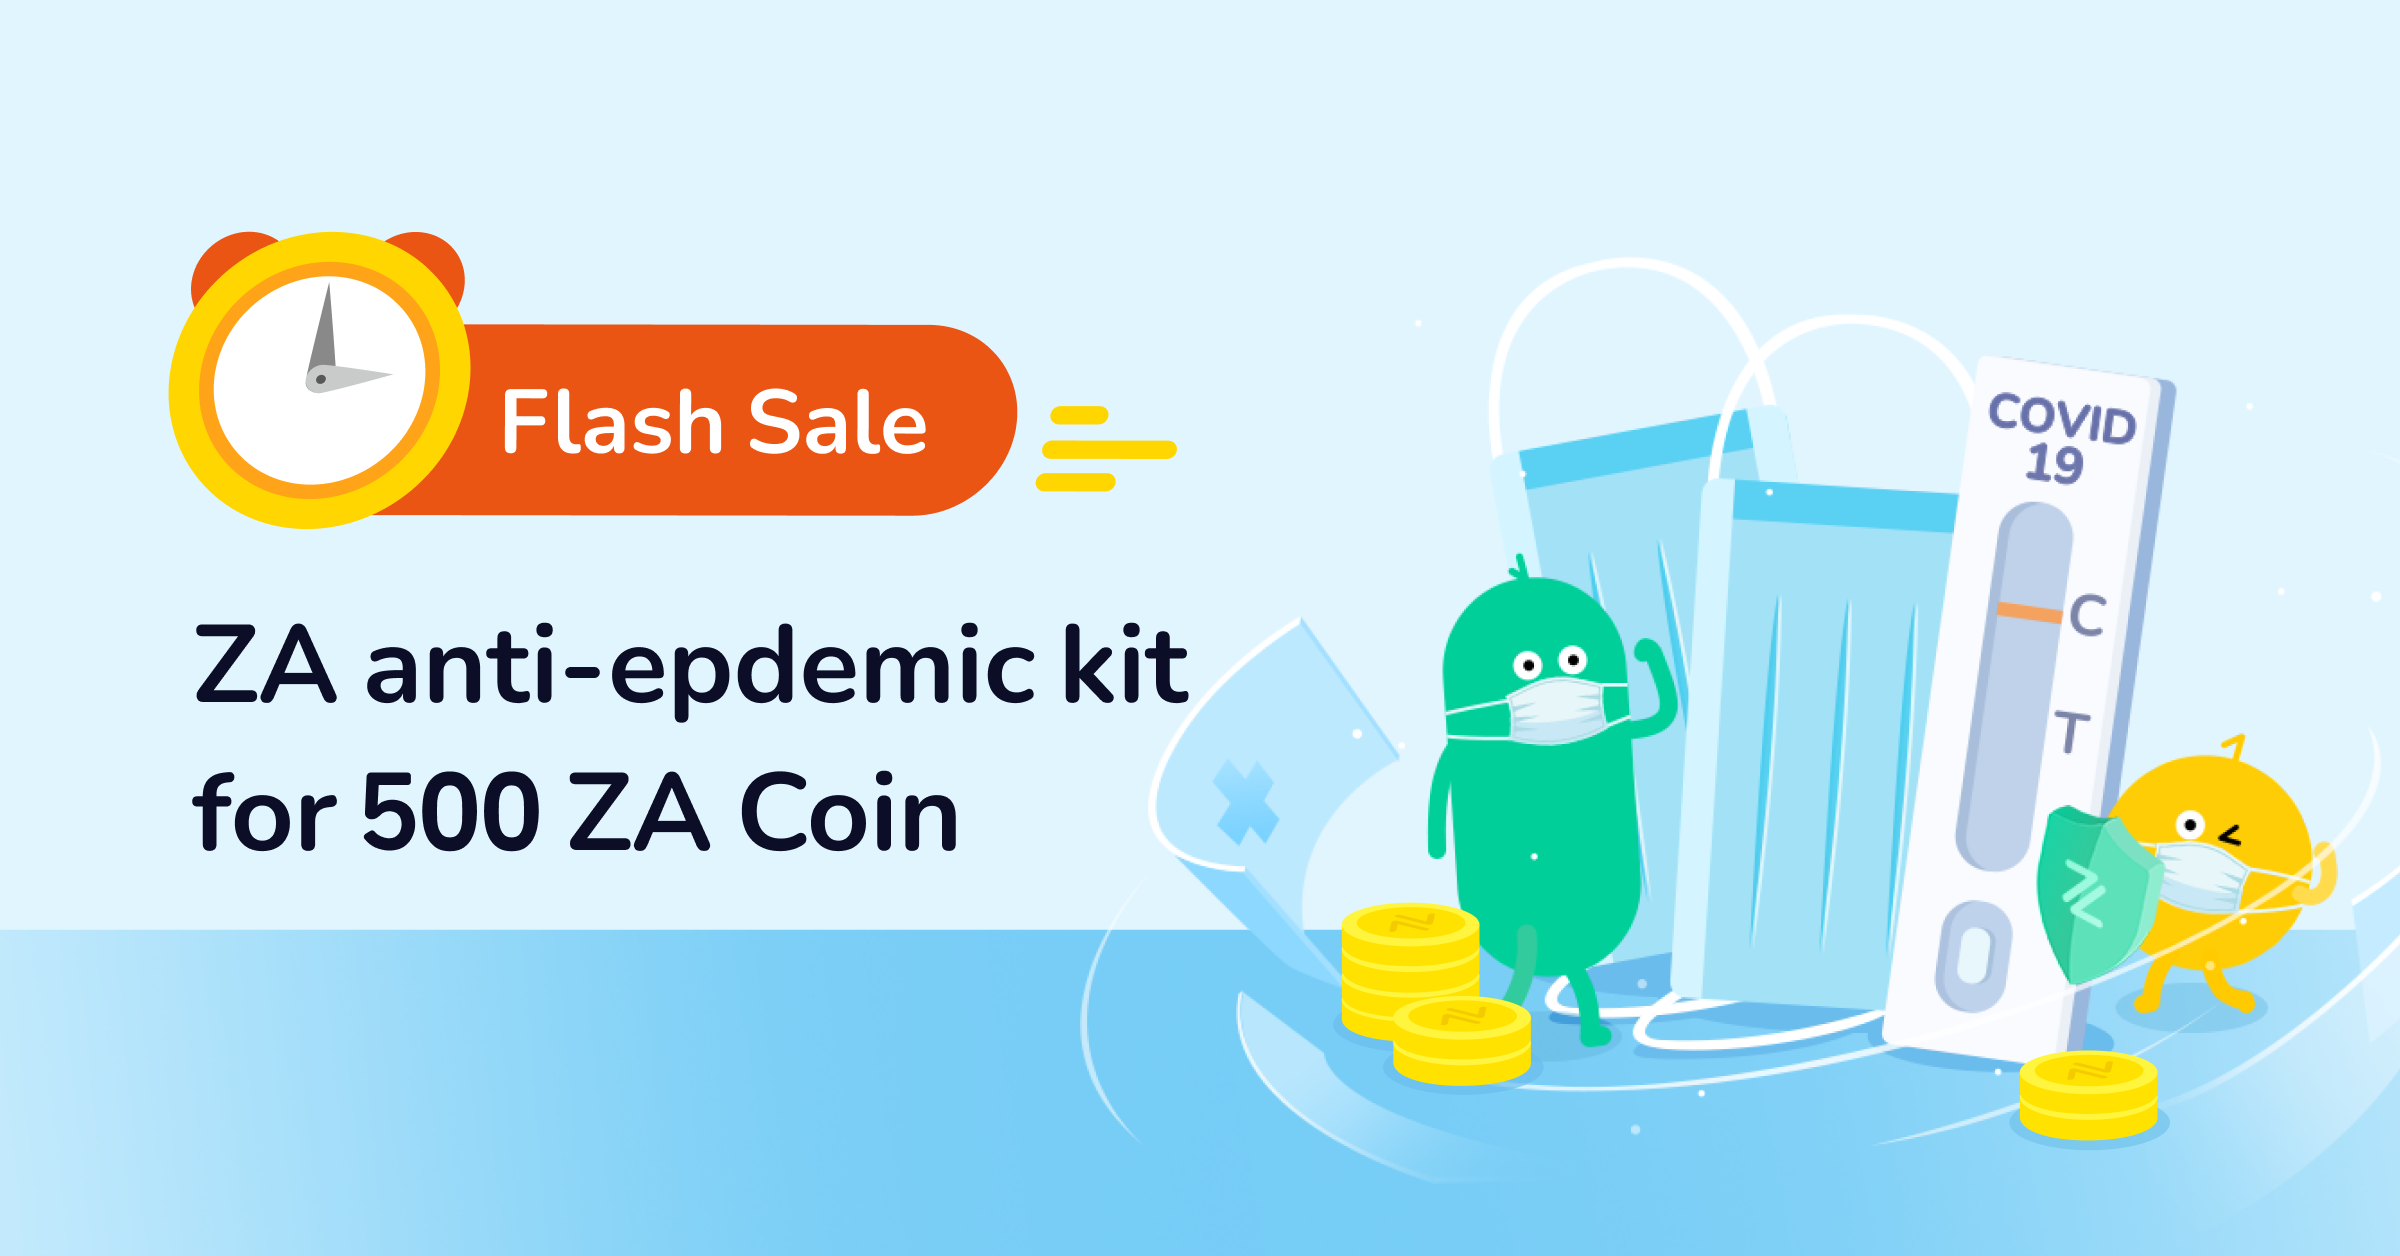 ⏰ Flash sale: 500 ZA Coin only!